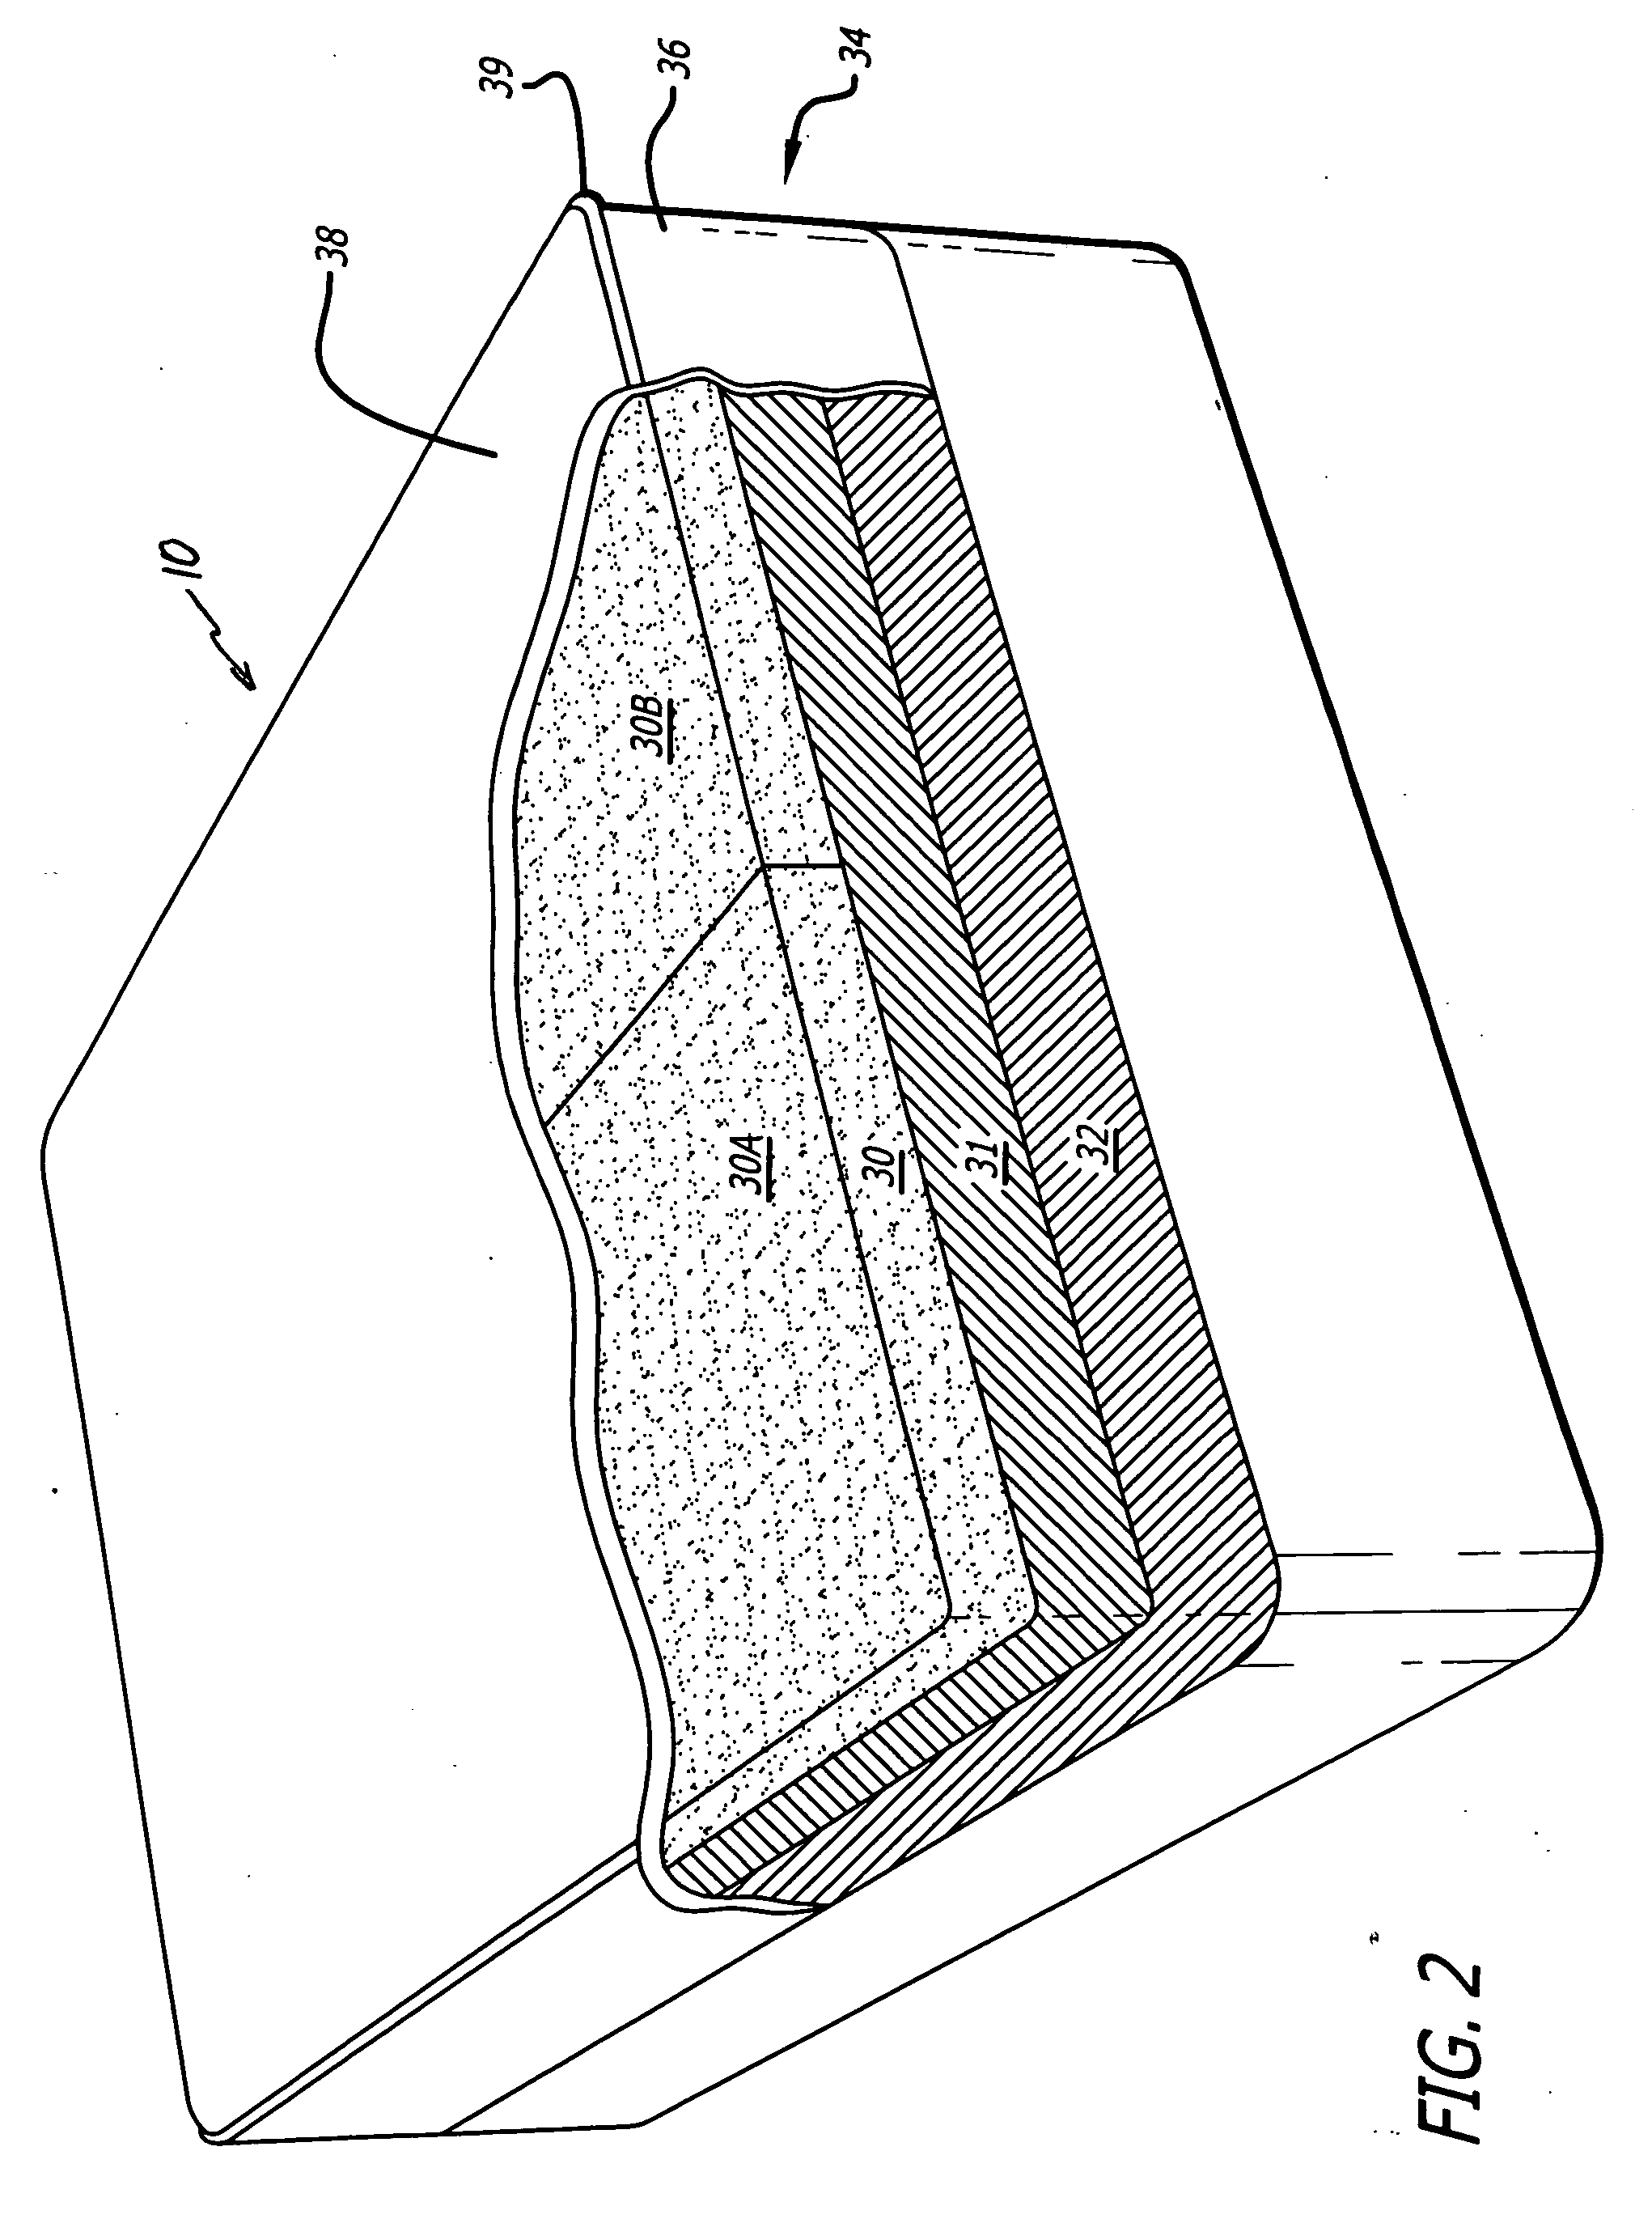 Composite mattress assembly and method for adjusting the same